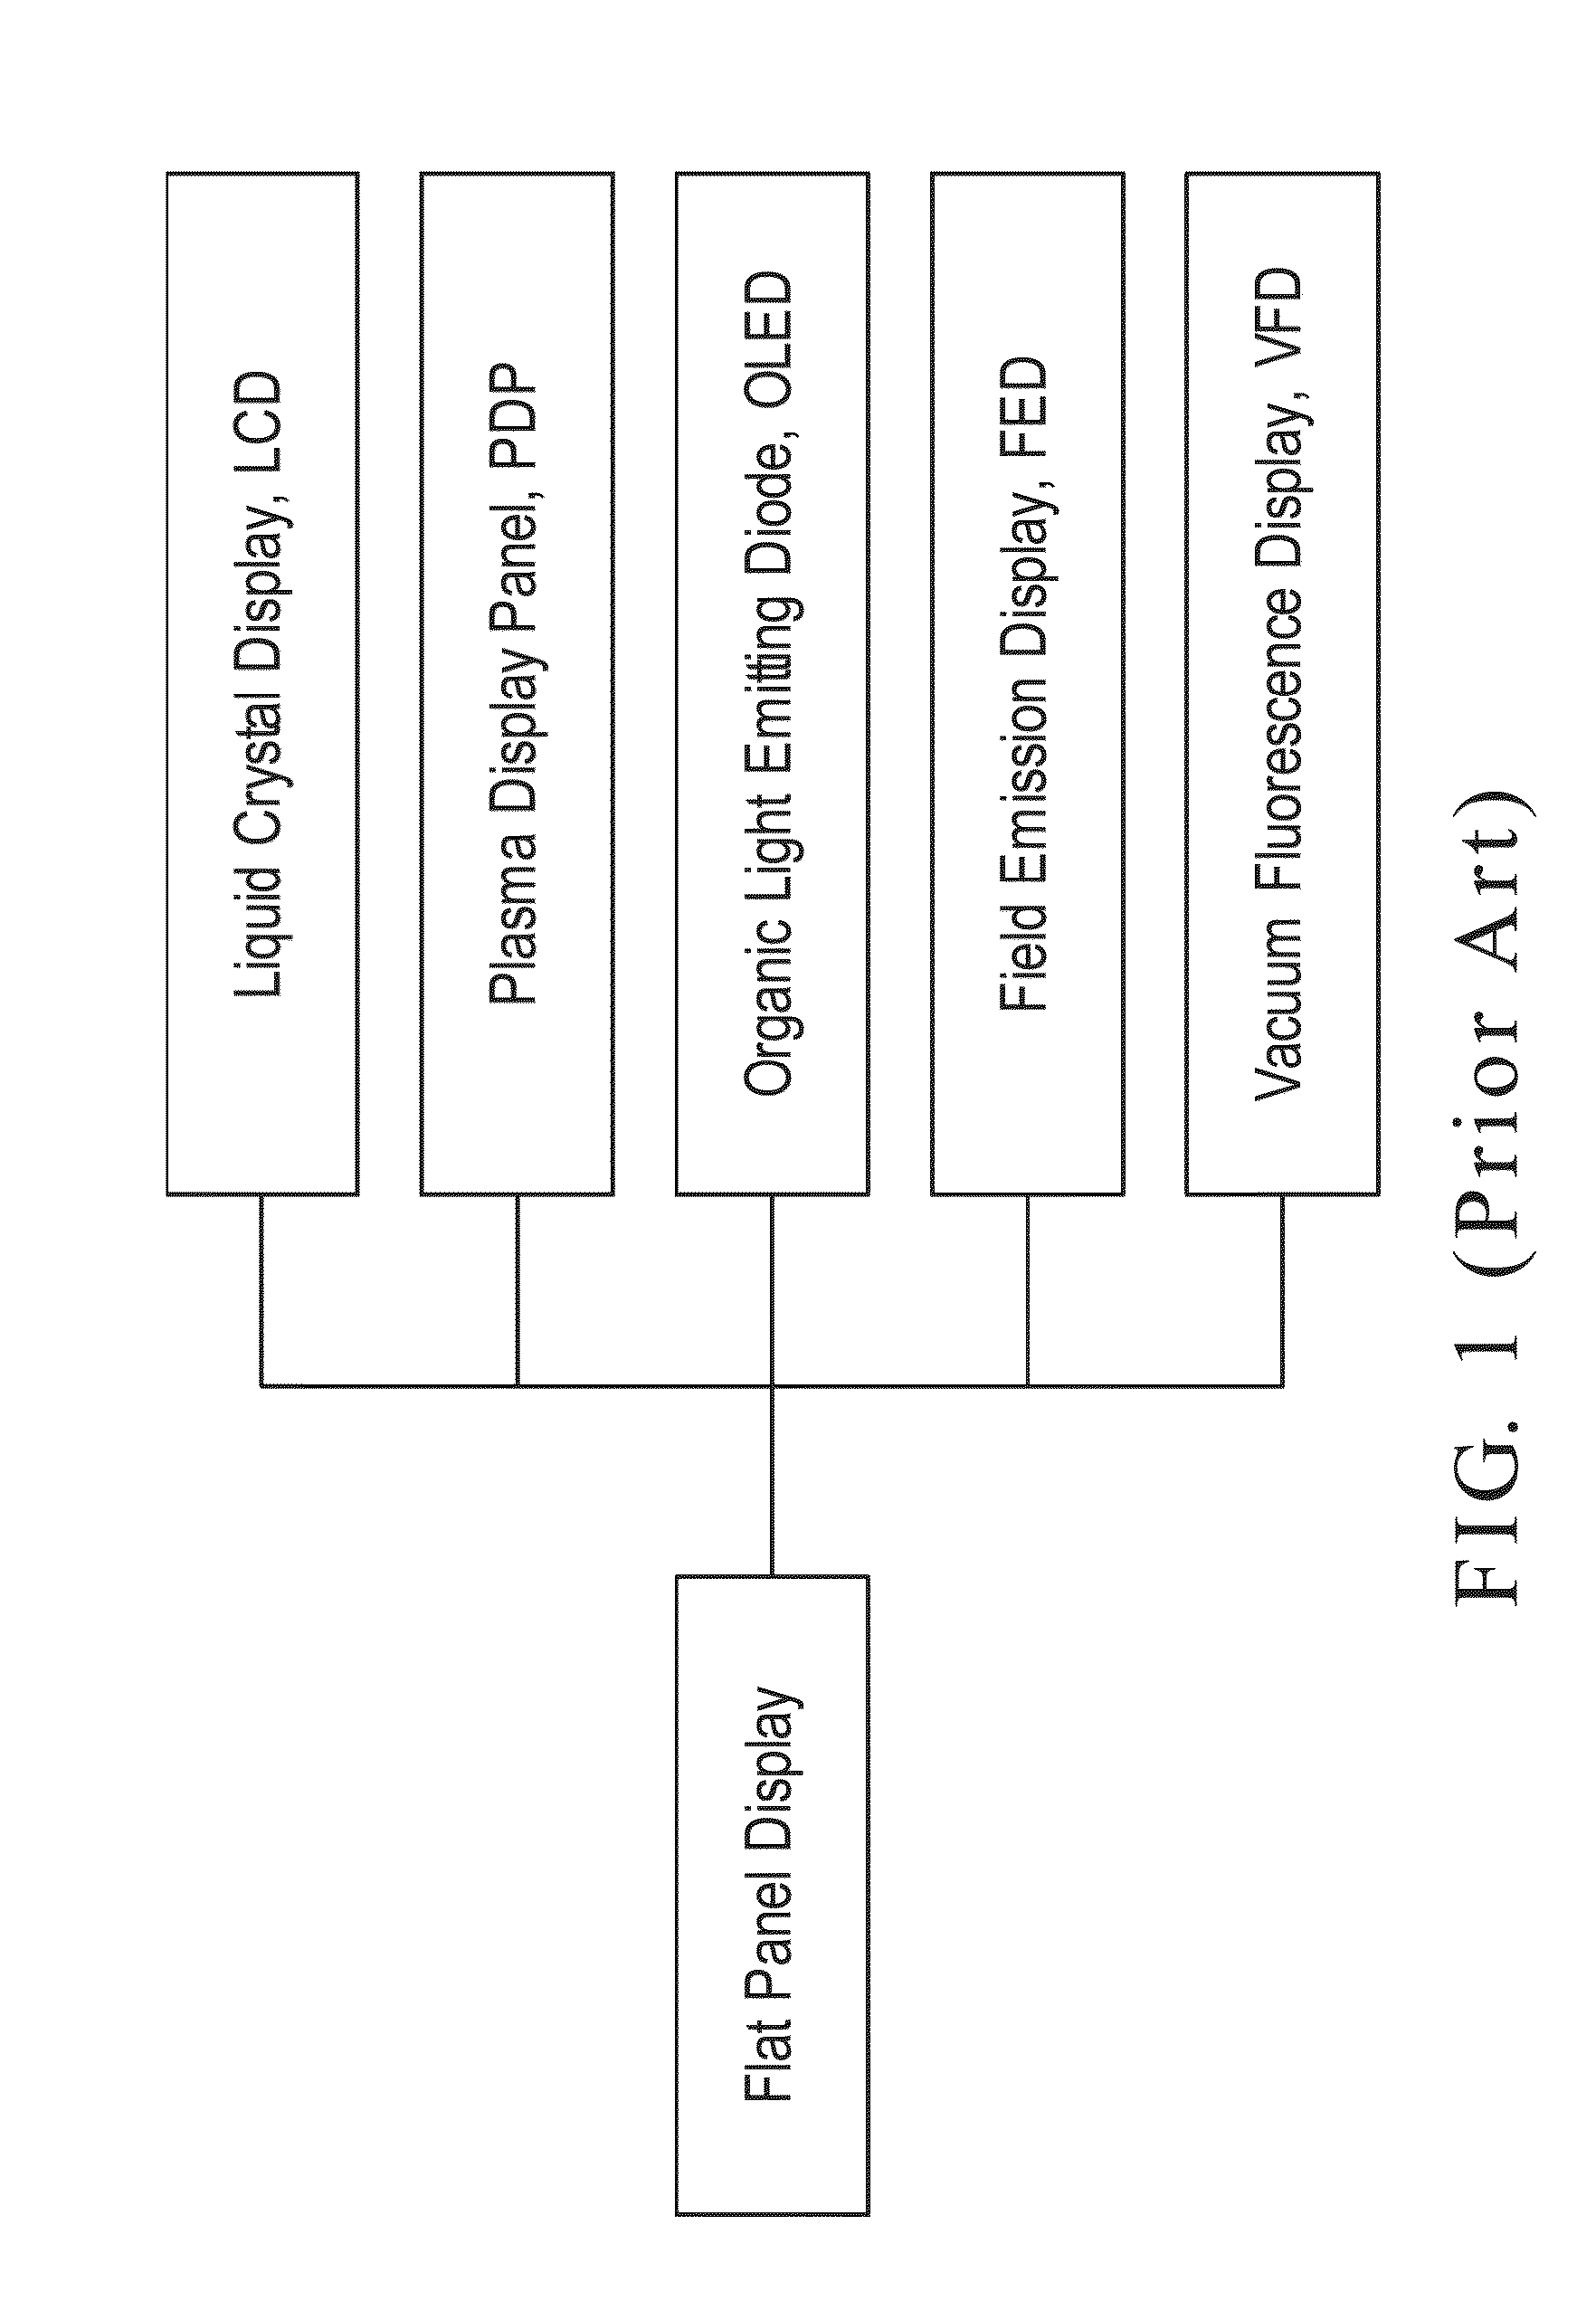 High-accuracy flat touch display panel structure